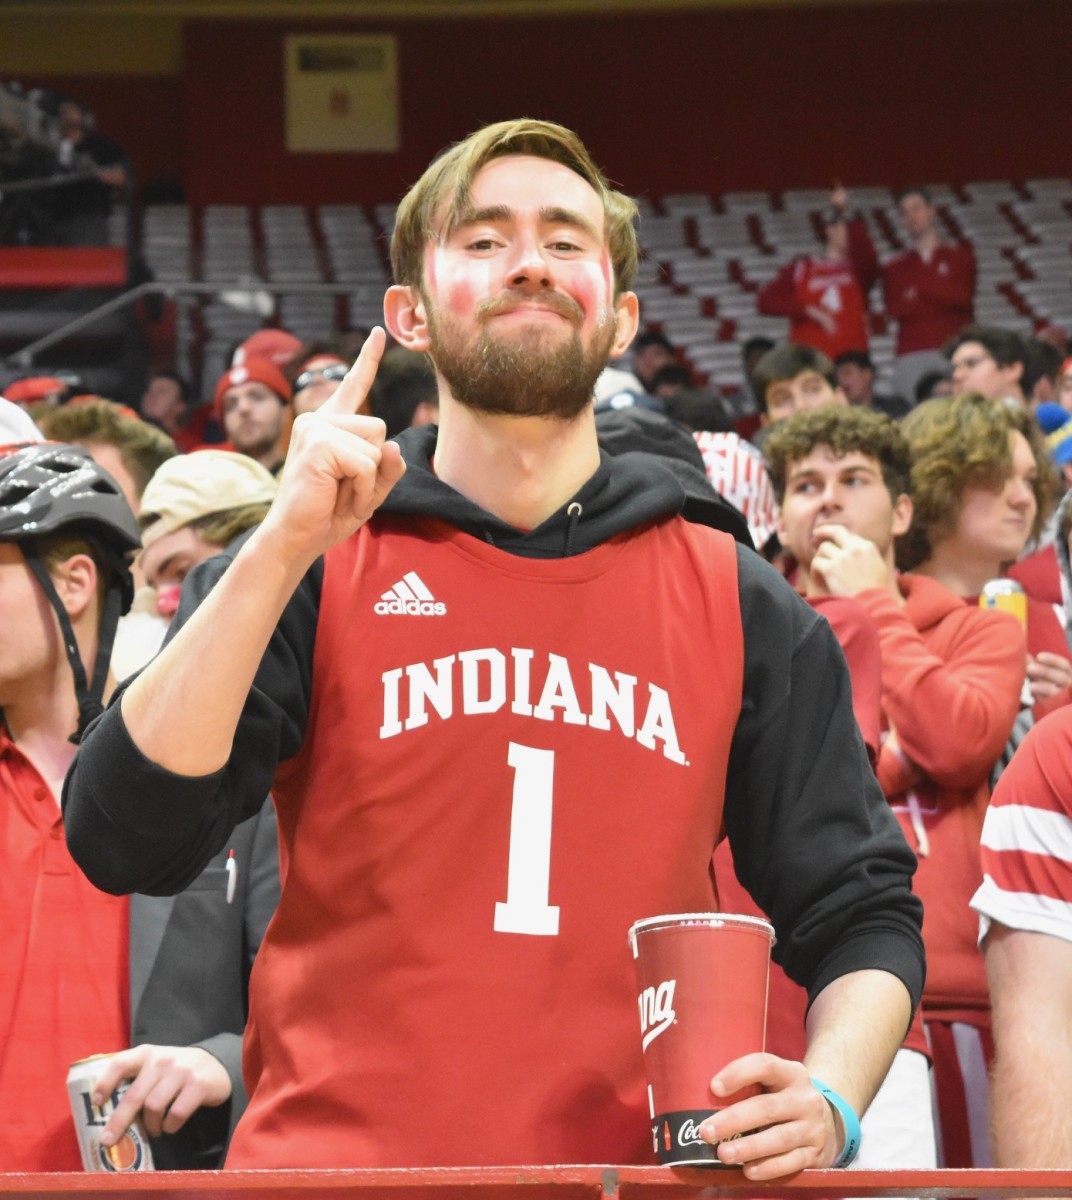 A confident fan was ready in the front row of the student section ahead of Indiana's matchup with Purdue.